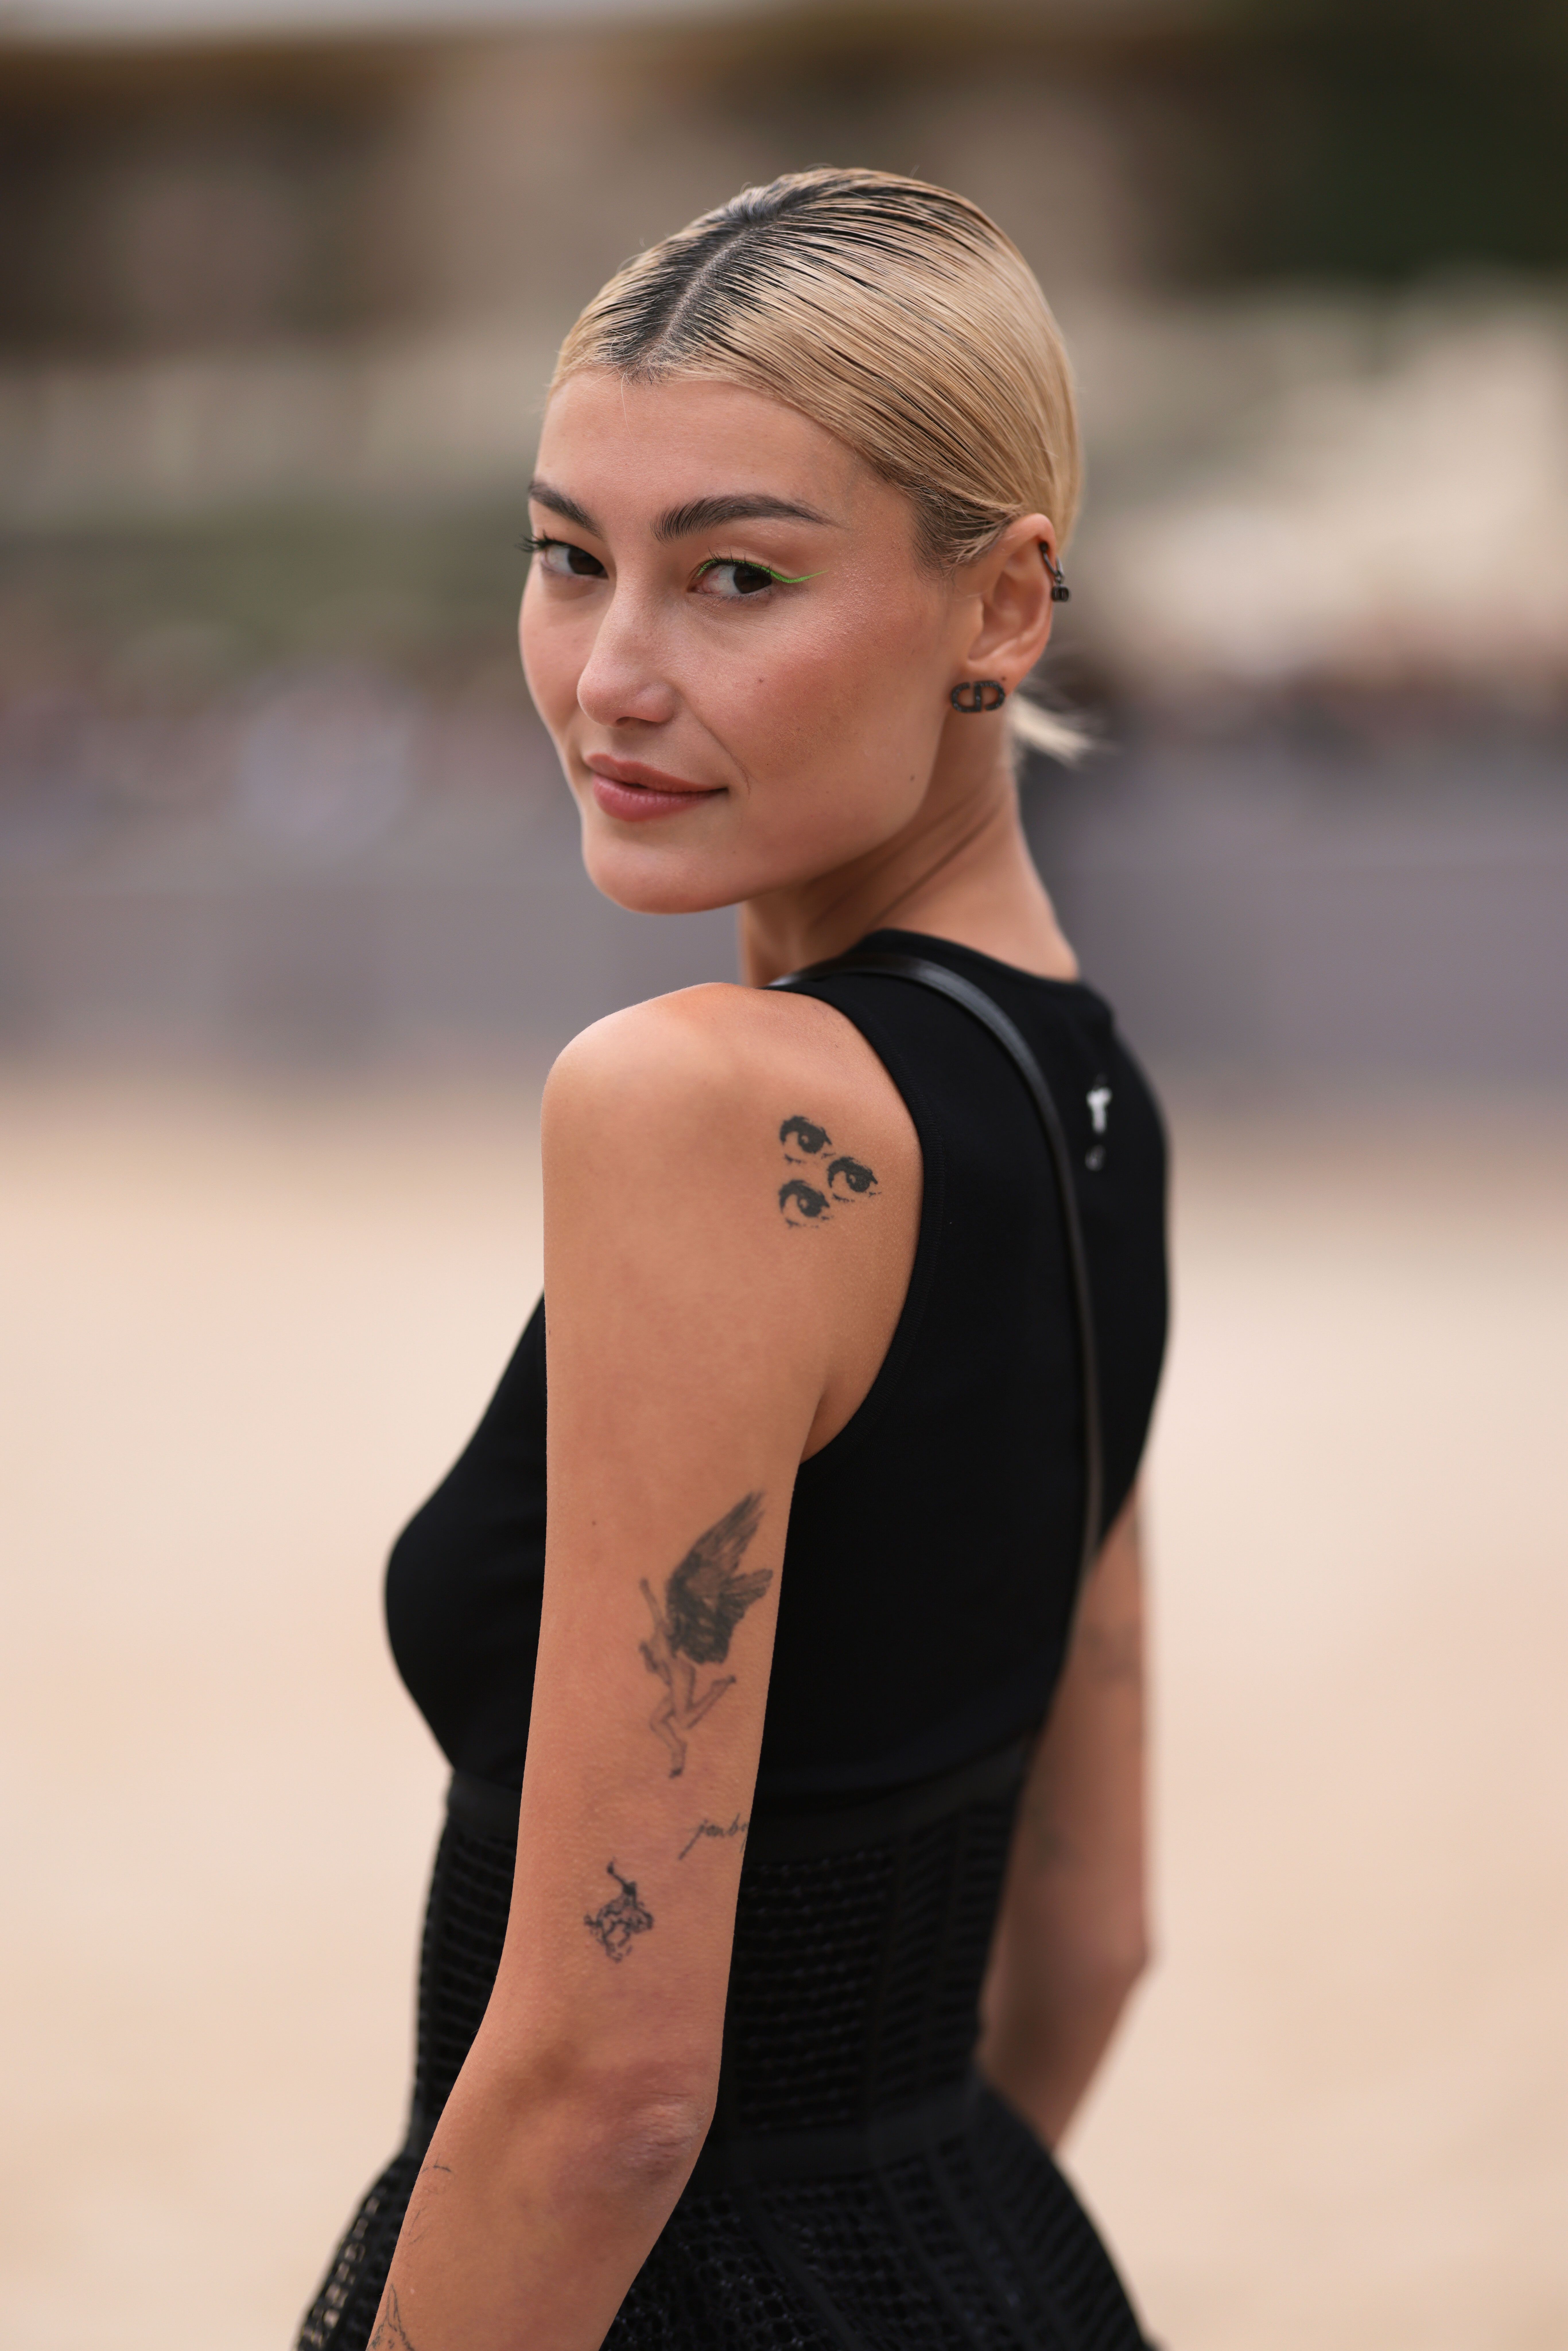 94 Self-Love Tattoo Ideas That Are Beautiful Inside And Out | Bored Panda